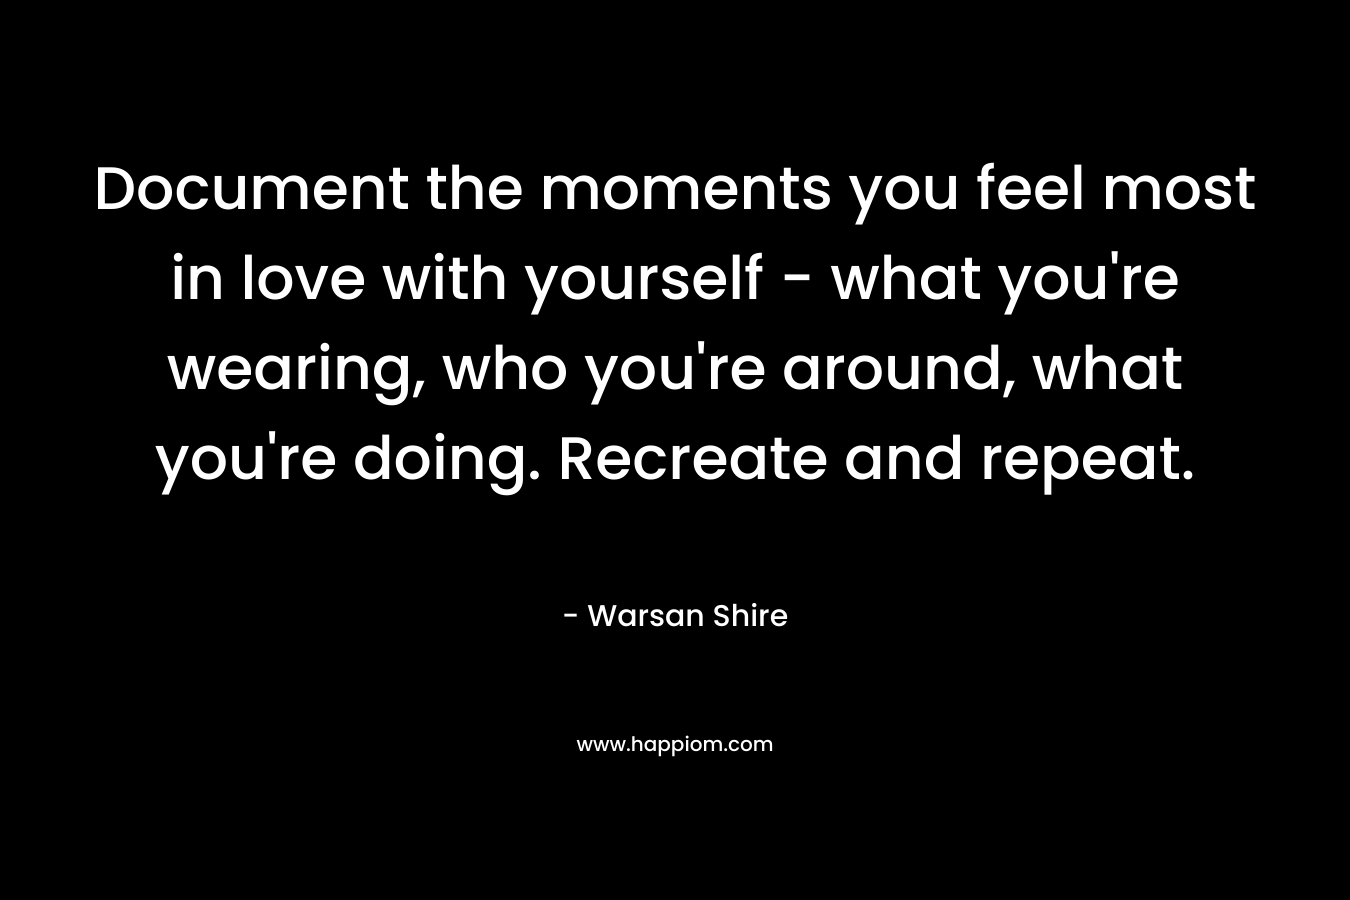 Document the moments you feel most in love with yourself – what you’re wearing, who you’re around, what you’re doing. Recreate and repeat. – Warsan Shire